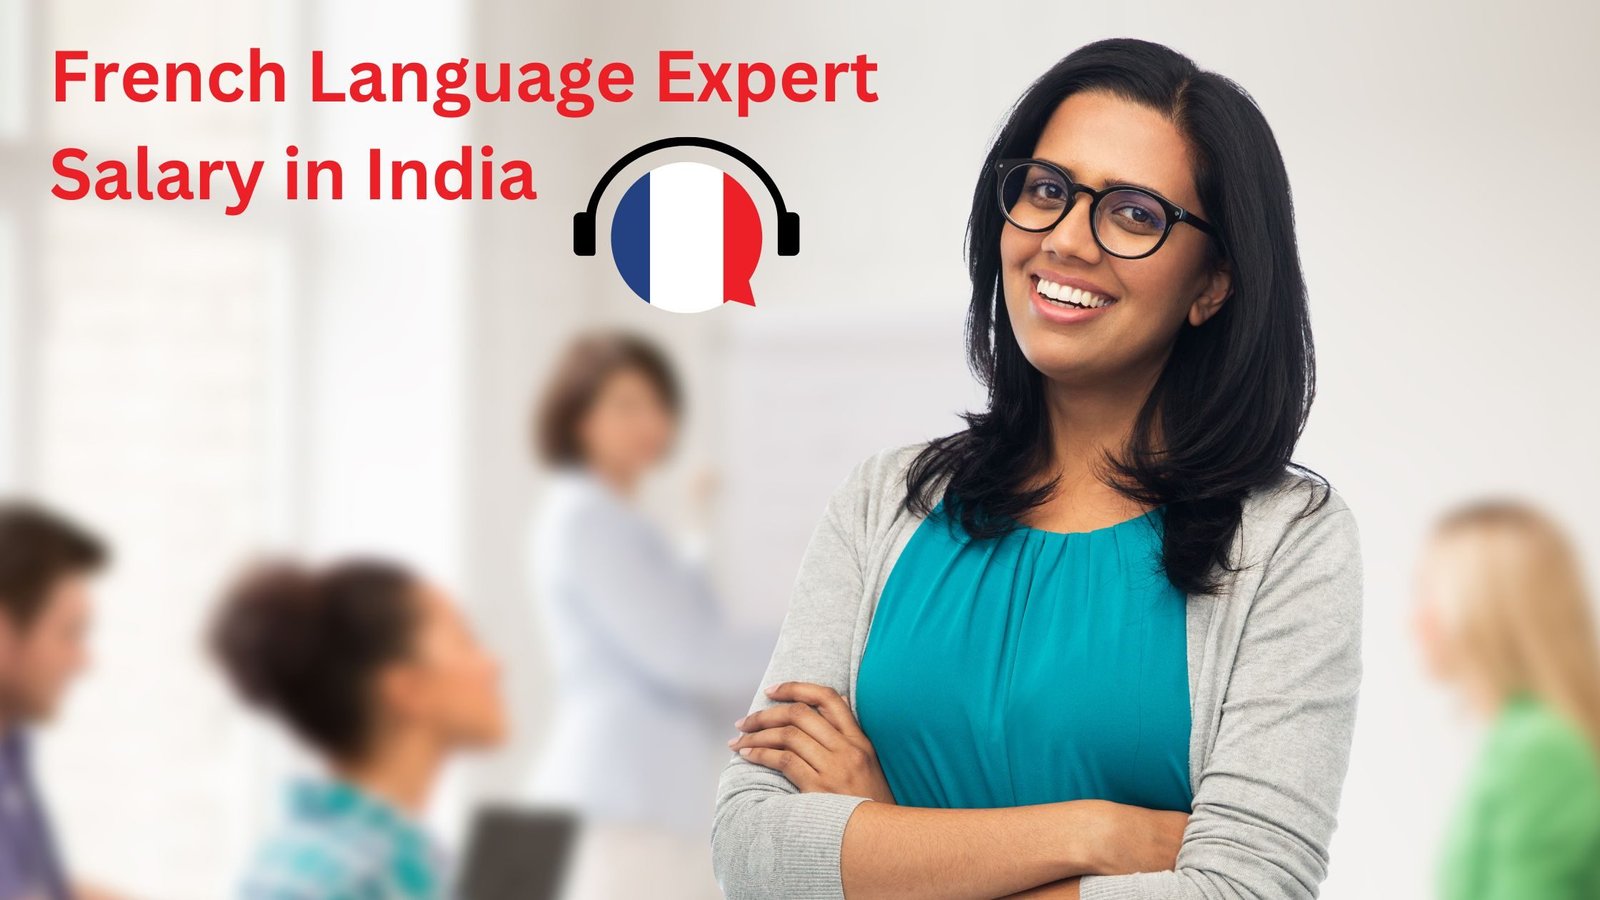 French Language Expert Salary in India